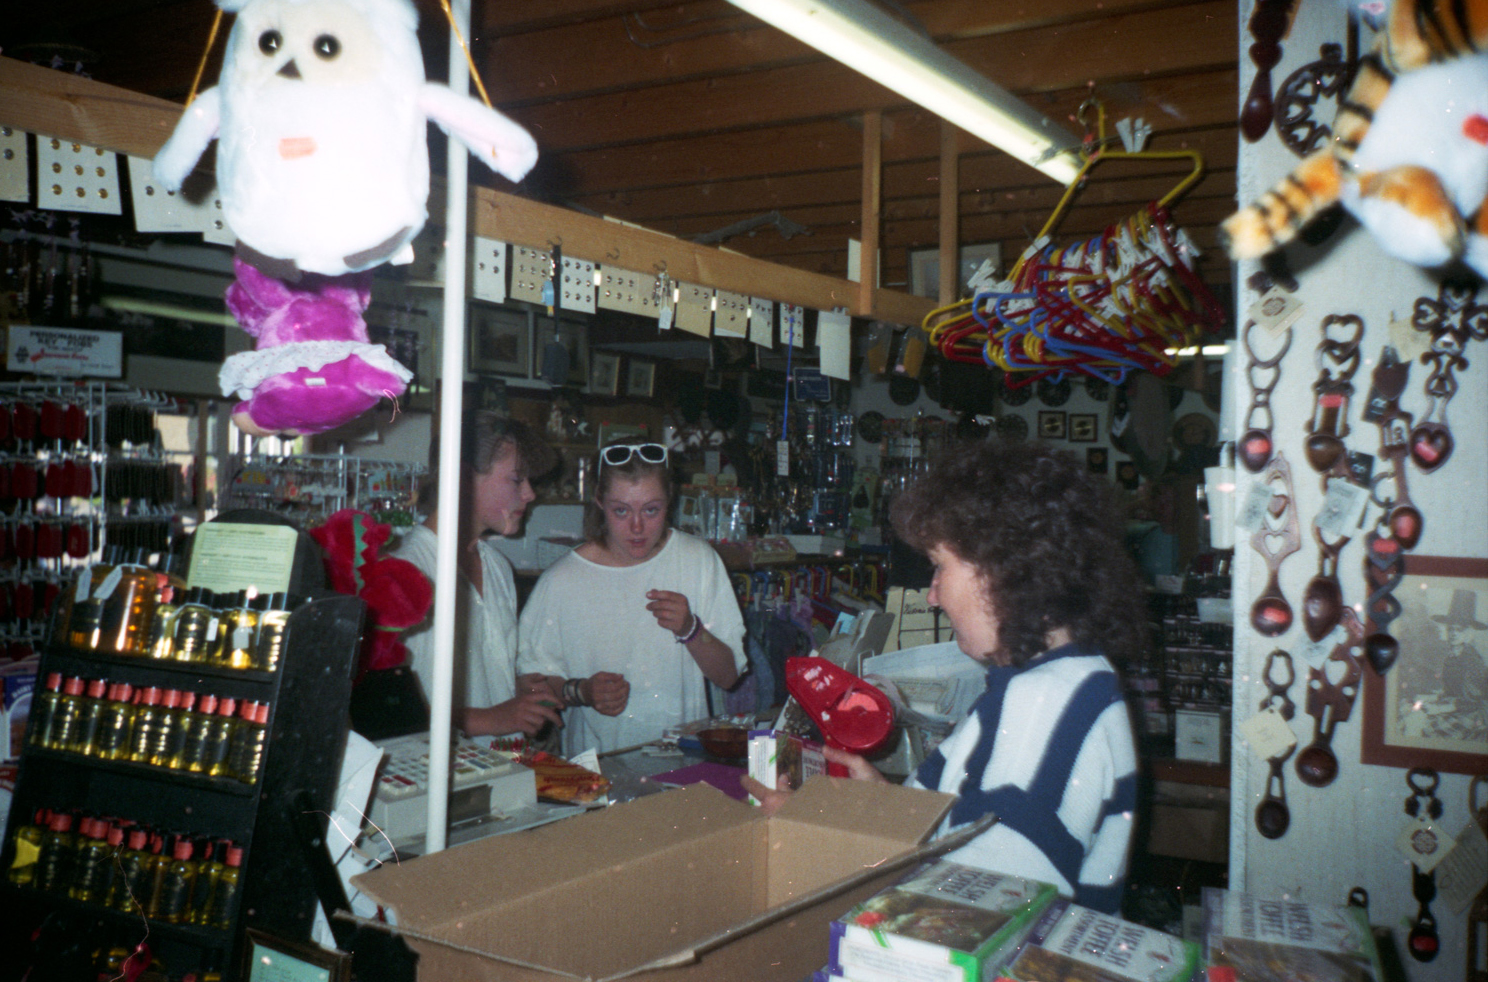 For a while it was the largest shop in the smallest city, It was a great gift shop run by Vanessa and Winston.